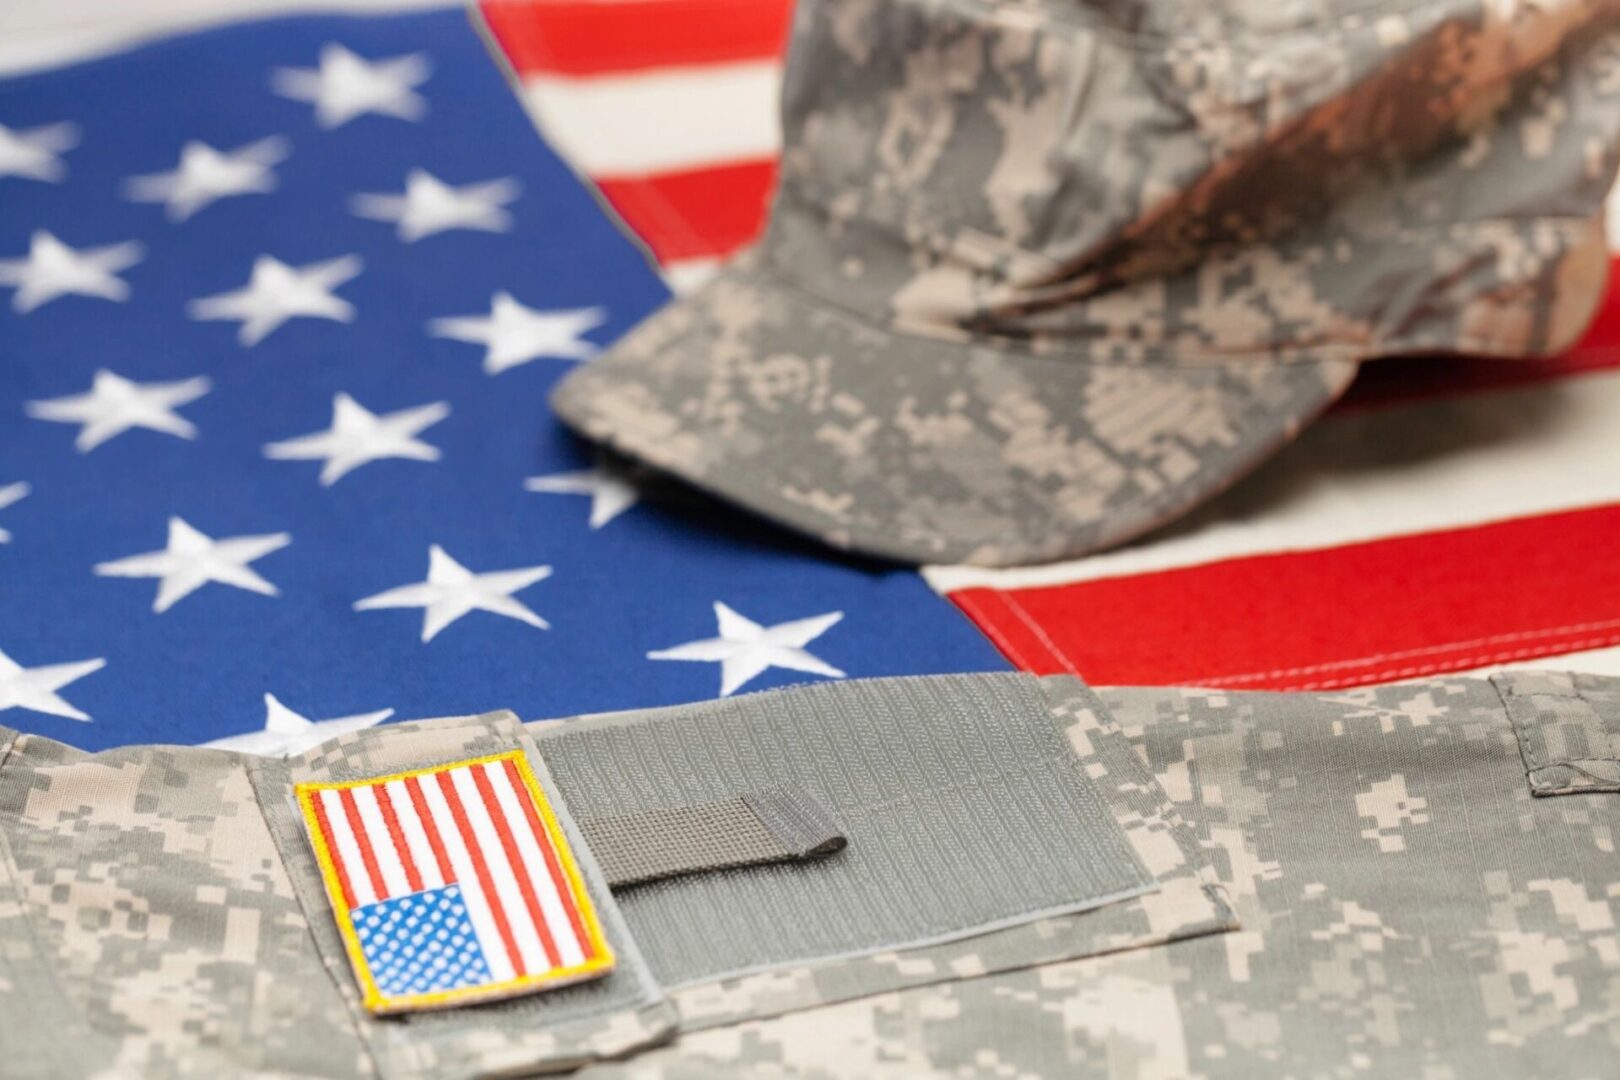 A camouflage cap and uniform on an American flag.